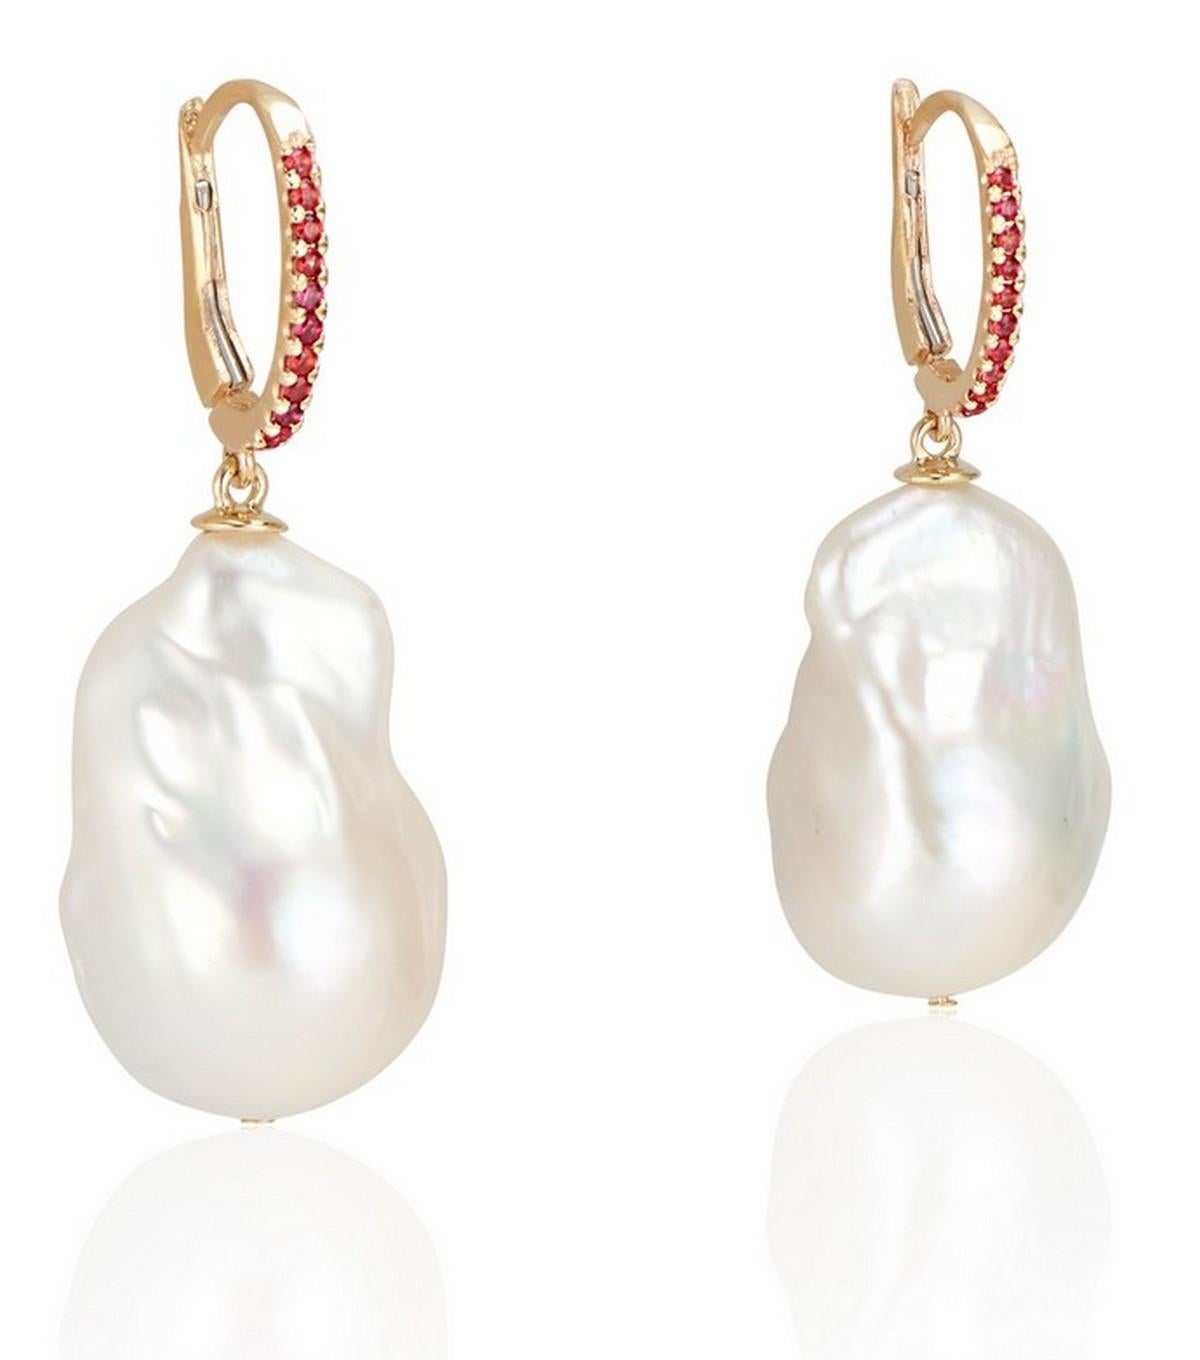 A modern and unexpected contrast of the flame orange sapphire set in a polished yellow gold lever back against the luminous freshwater baroque pearl.
Add a little subtle drama to your look, with these gorgeous earrings.


Earring Length: 1.5